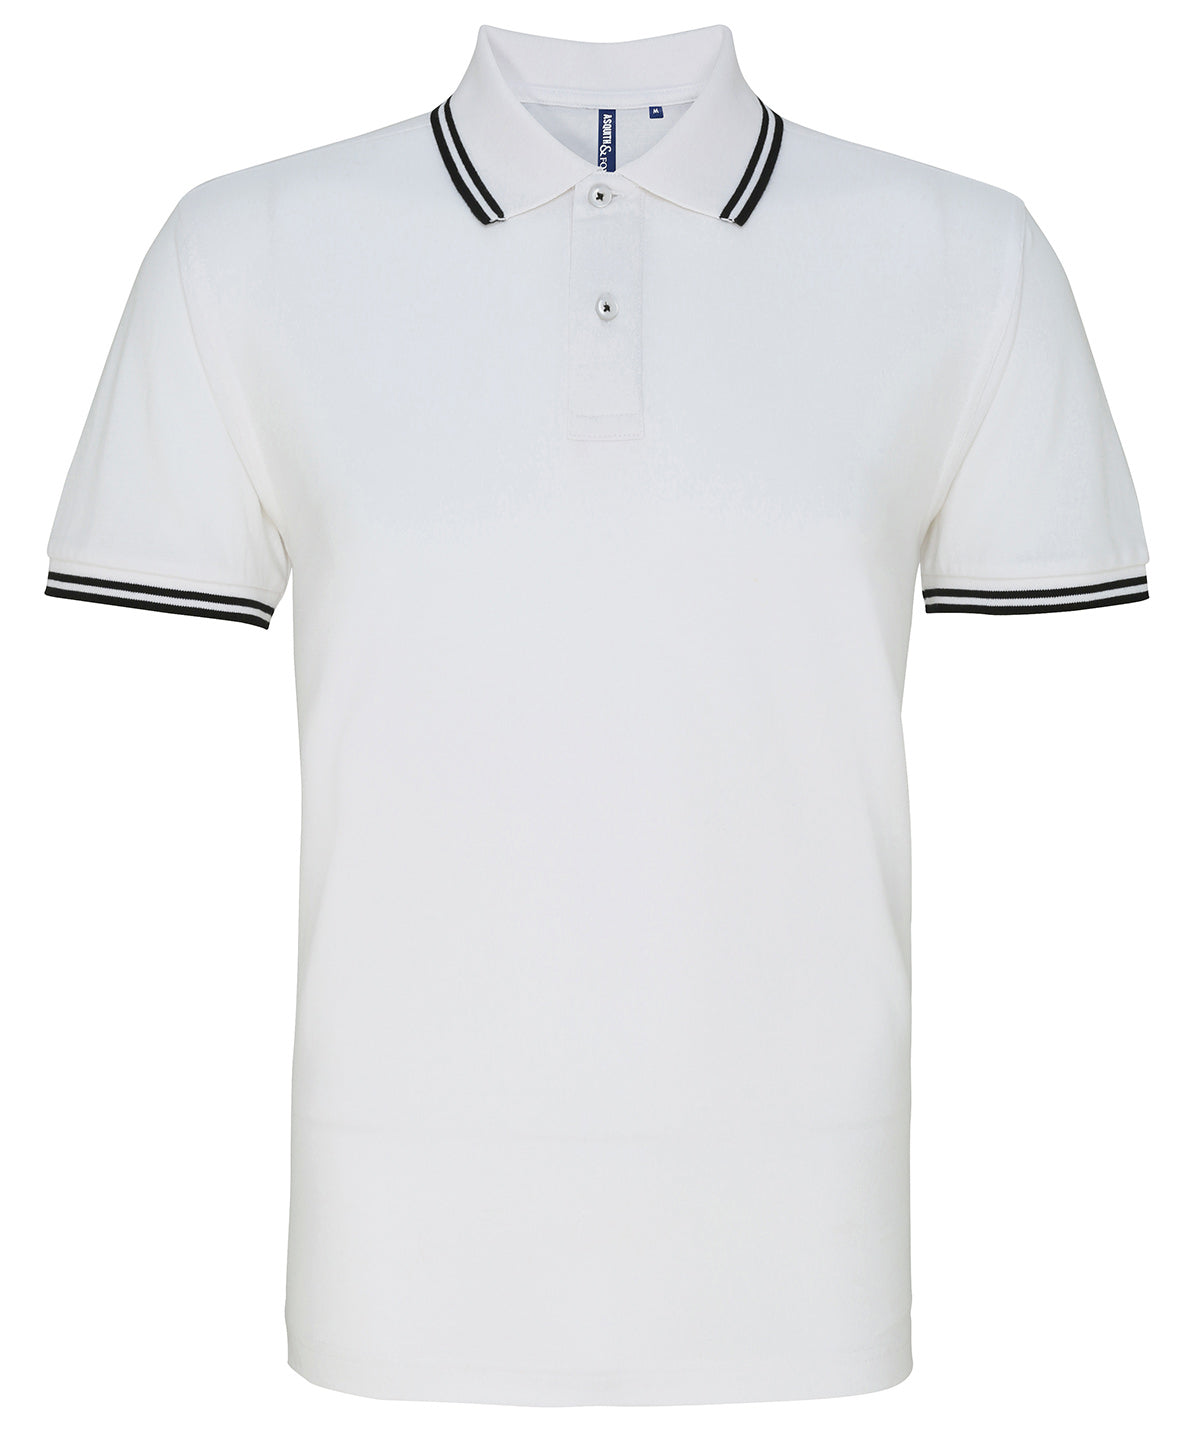 Personalised Polo Shirts - Black Asquith & Fox Men's classic fit tipped polo